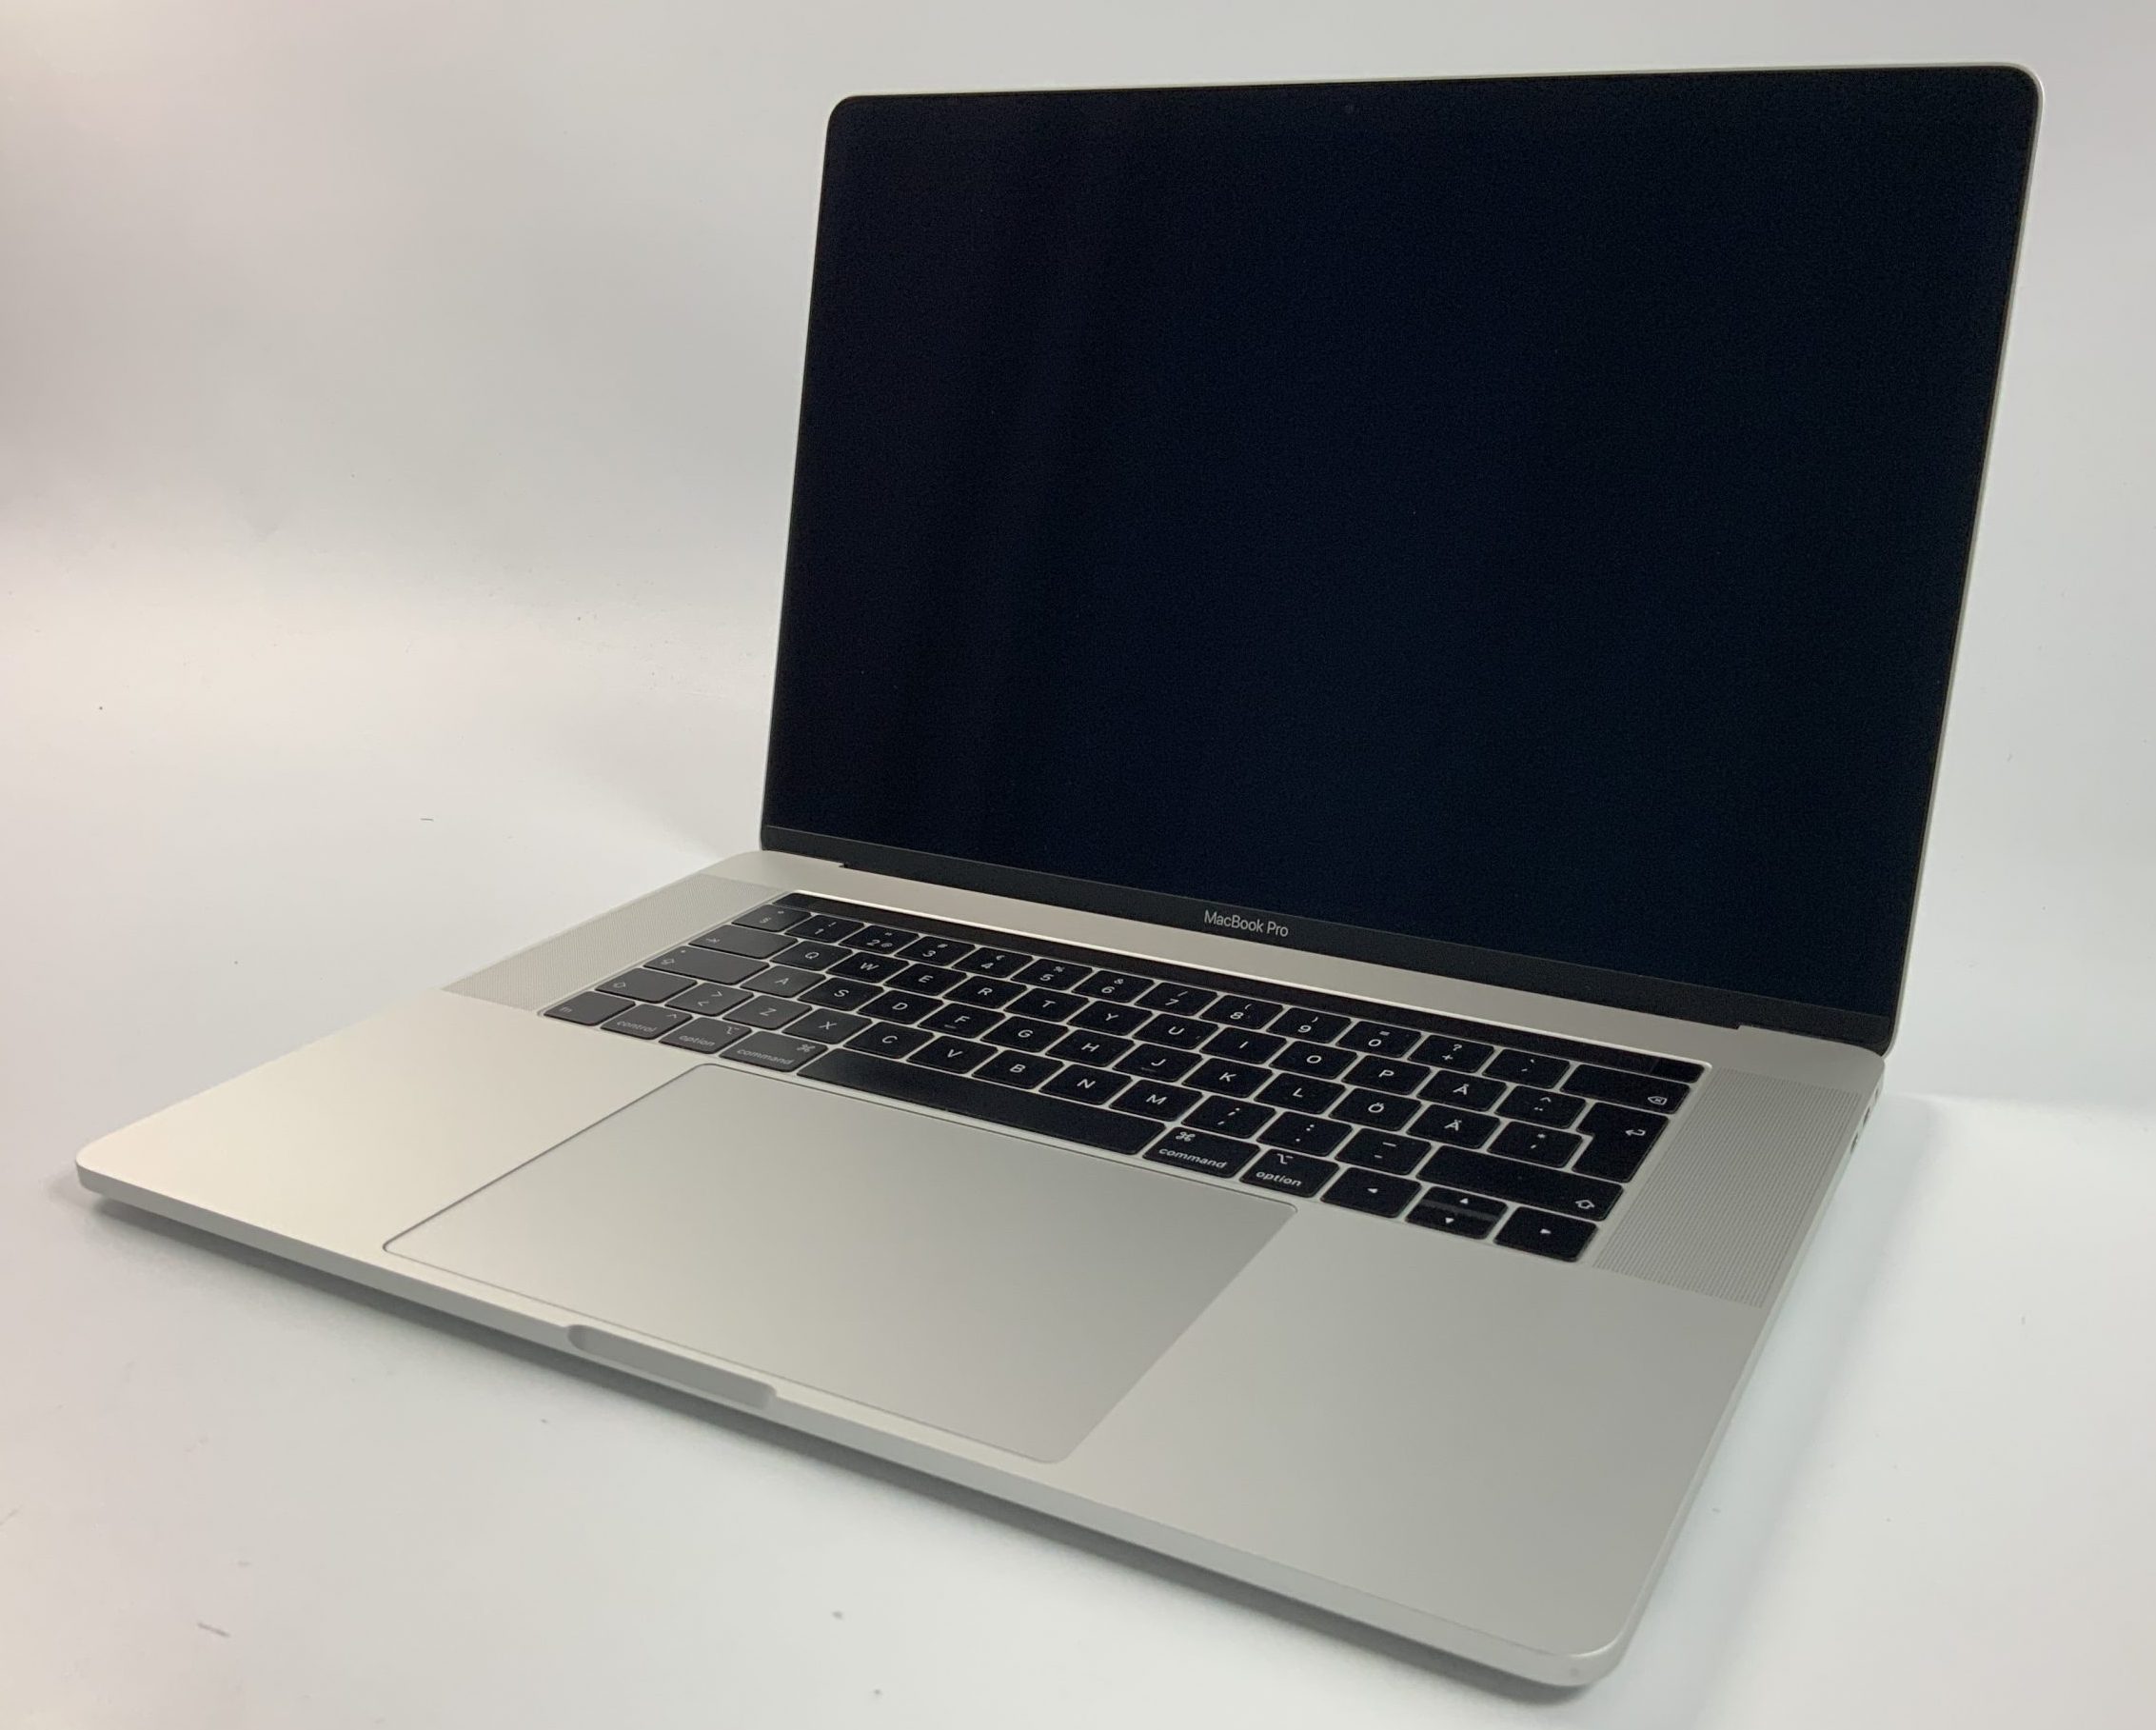 MacBook Pro 15" Touch Bar Mid 2018 (Intel 6-Core i7 2.6 GHz 32 GB RAM 512 GB SSD), Silver, Intel 6-Core i7 2.6 GHz, 32 GB RAM, 512 GB SSD, immagine 1